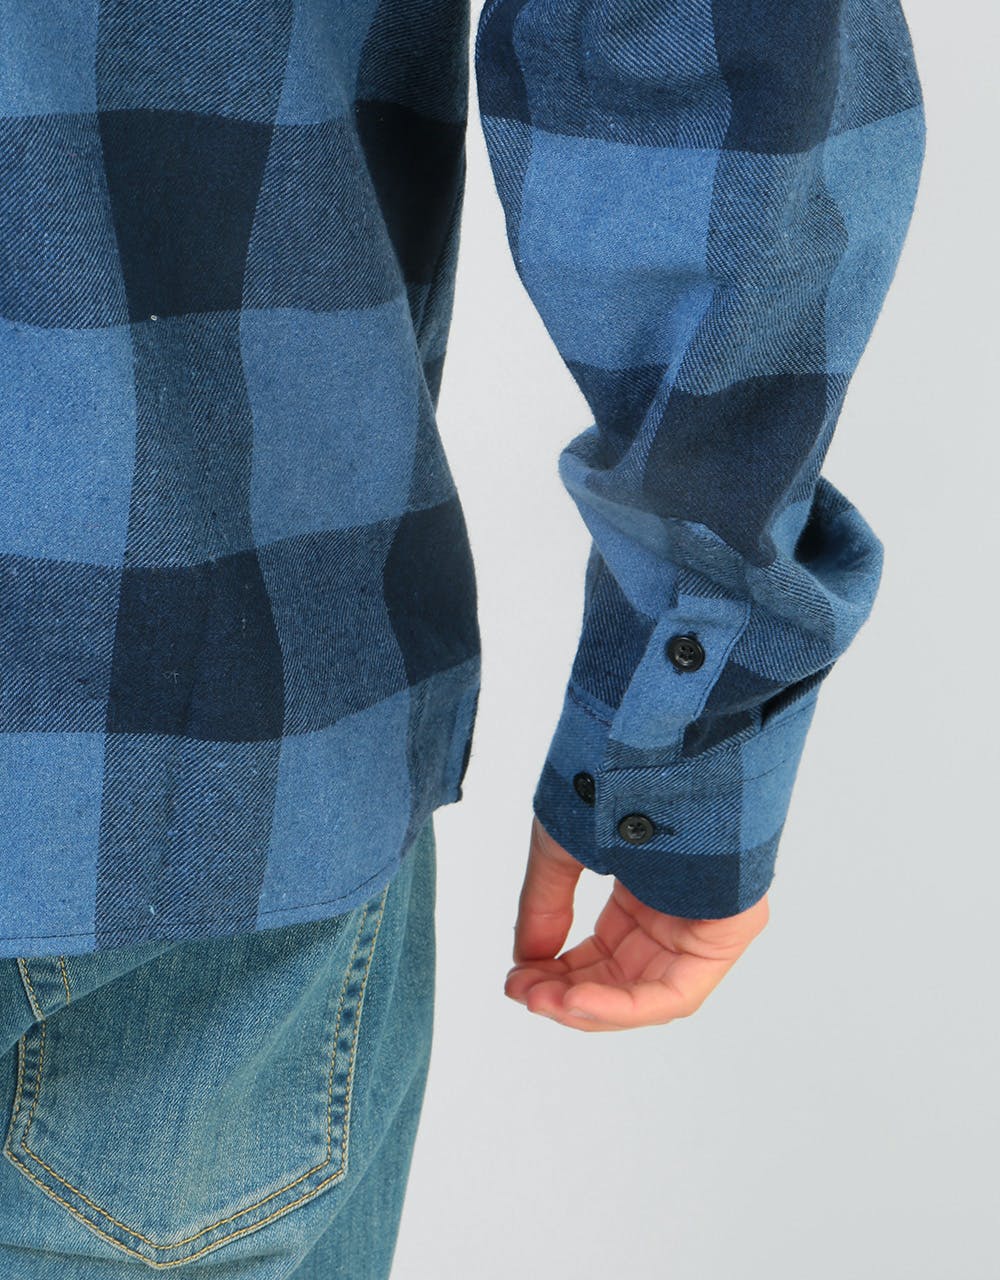 Route One Flannel Shirt - Navy Blue/Powder Blue